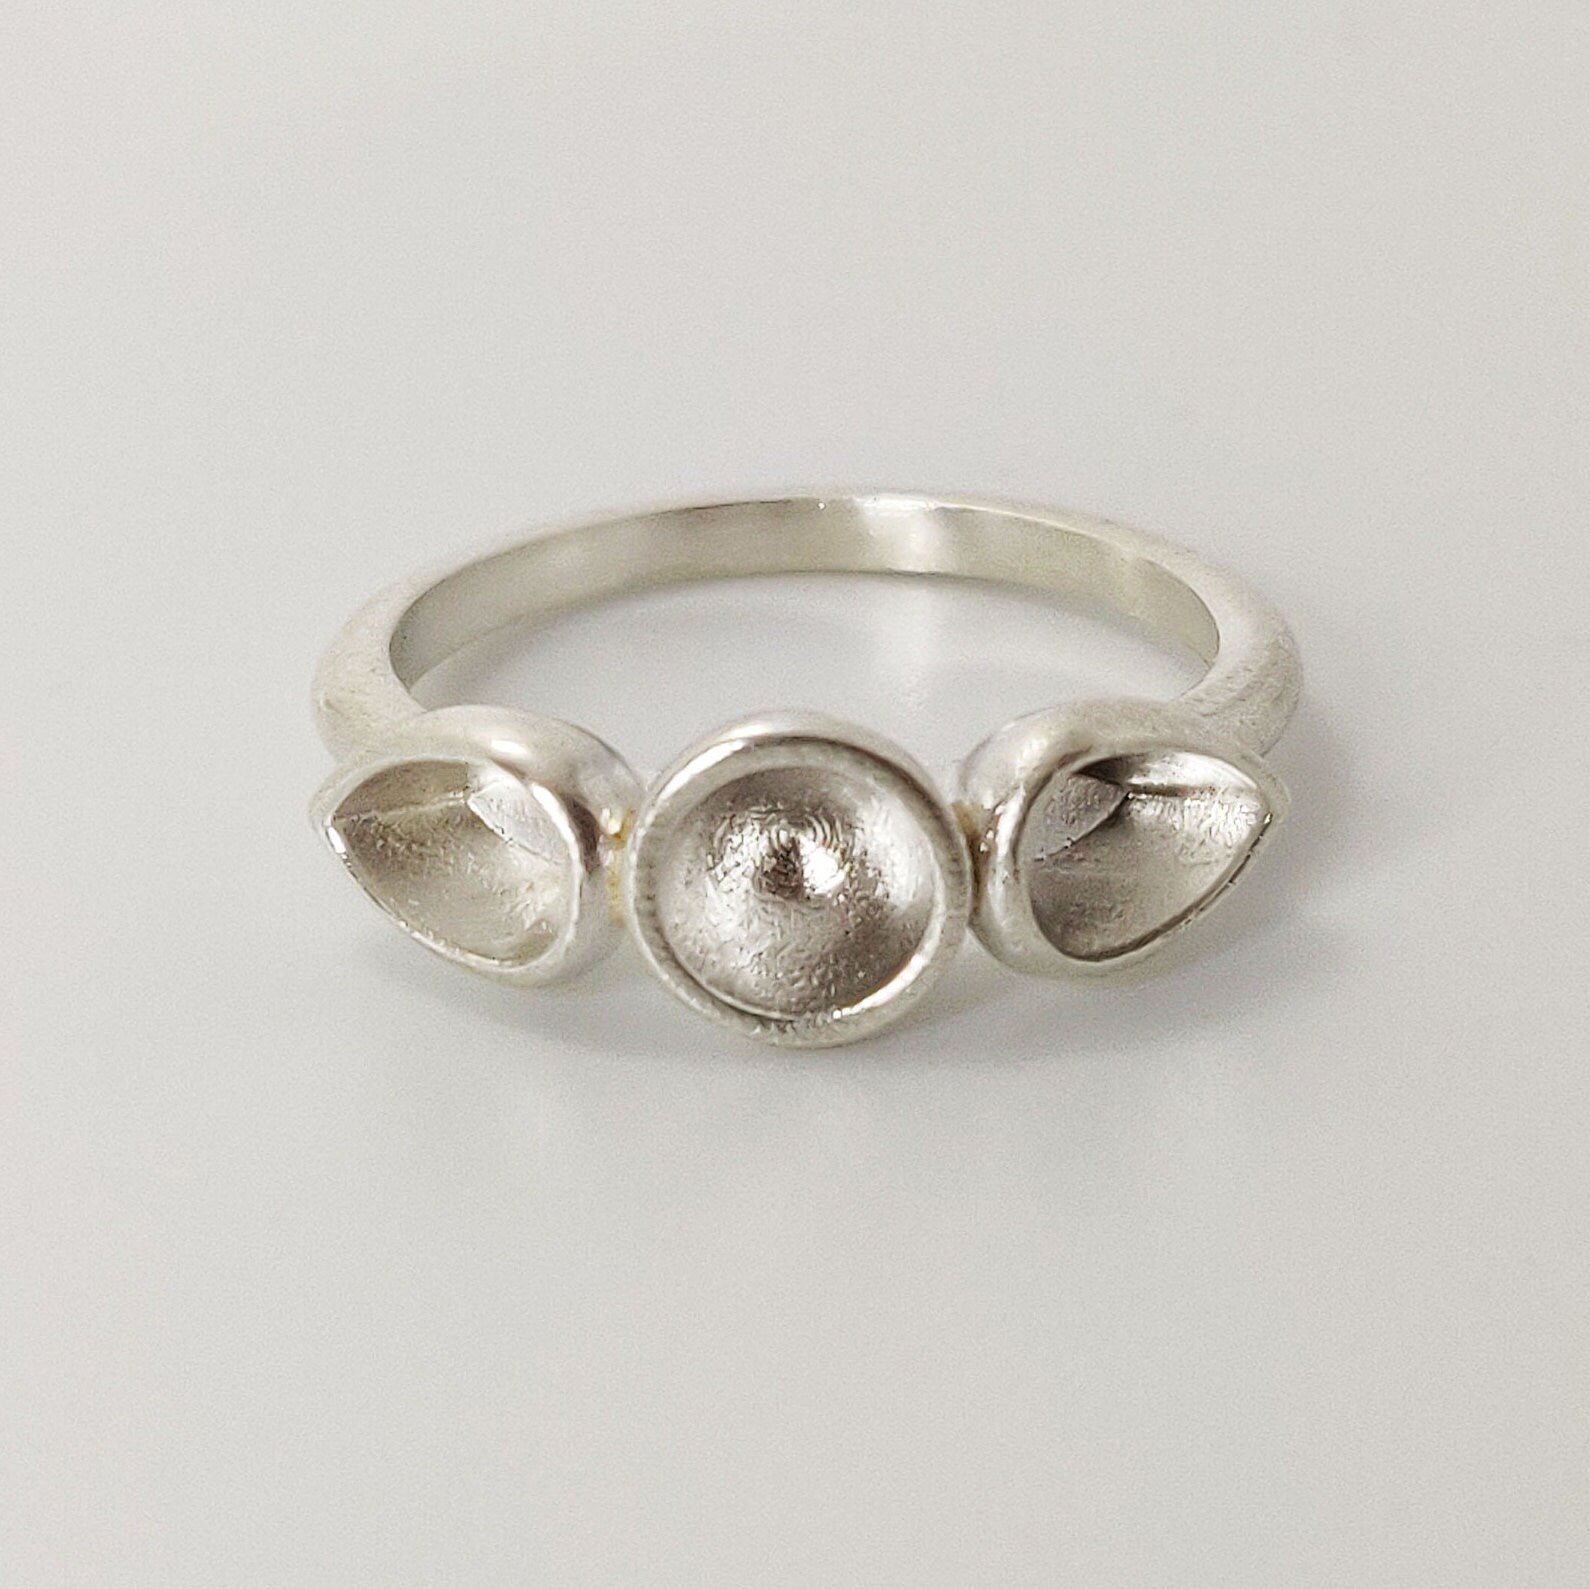 3 stone Silver Cup Bezel Ring Setting. Round Sealed Cup Rubover Bezel. Pear, Round, Pear Setting. 9ct Yellow Gold Cup Bezel Stacking Ring.